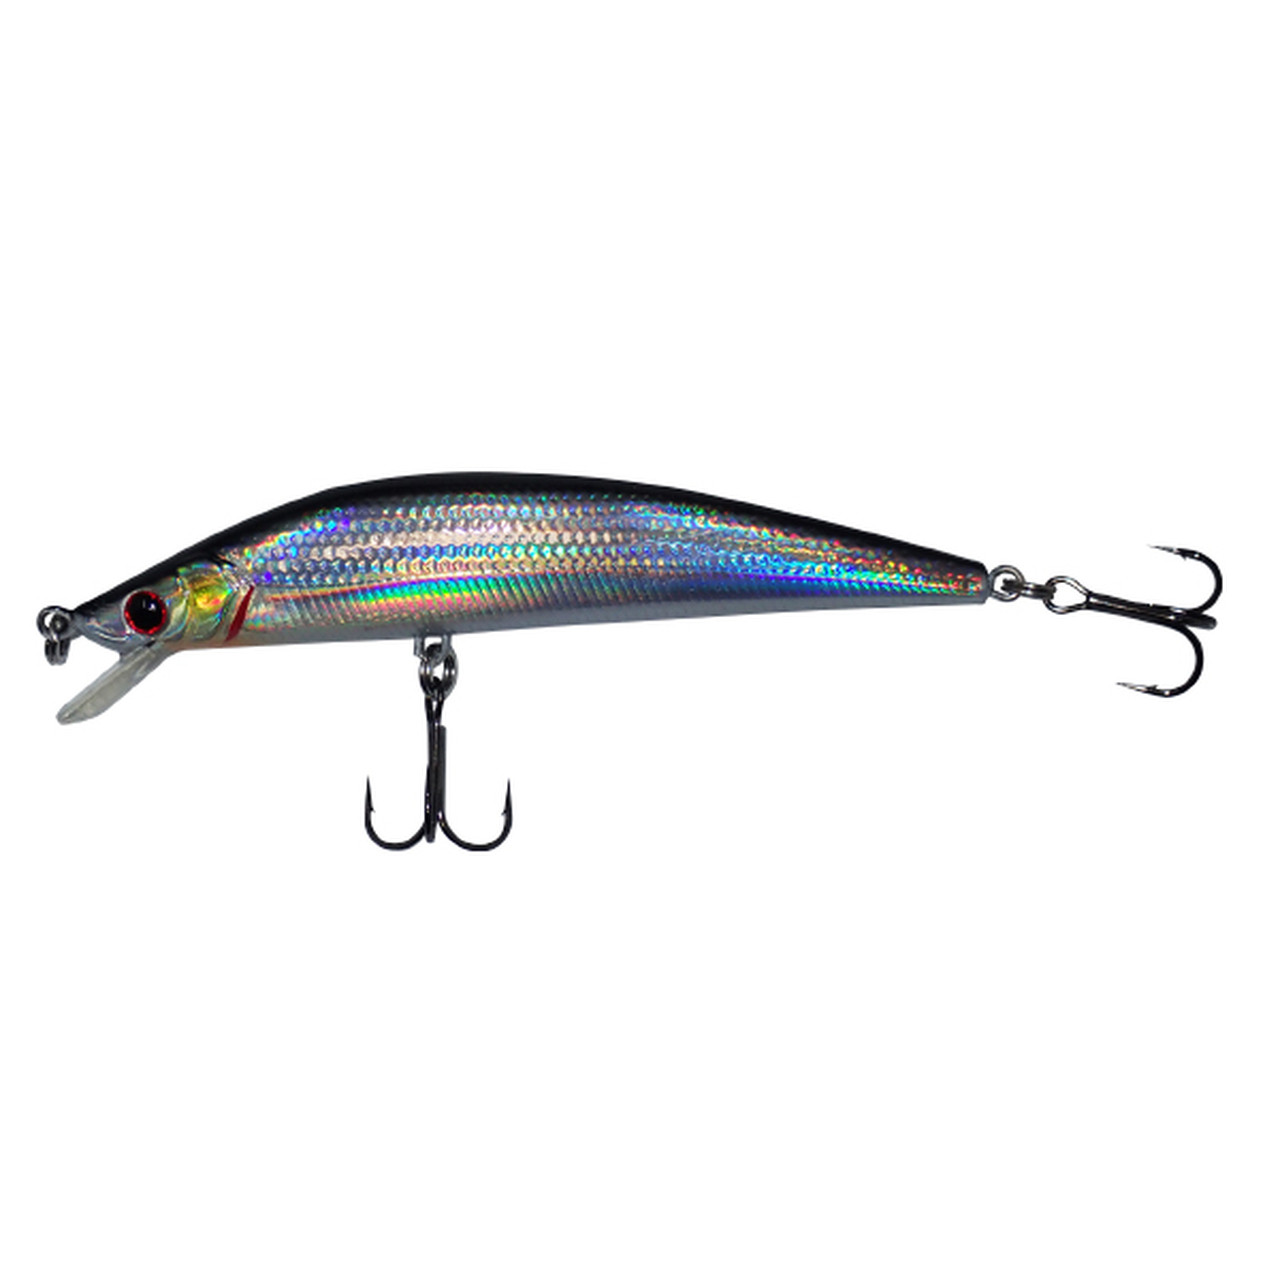 SteelShad Floater Diver Series Fishing Lure - Classic - 1/2 oz. ~ 4 in. 